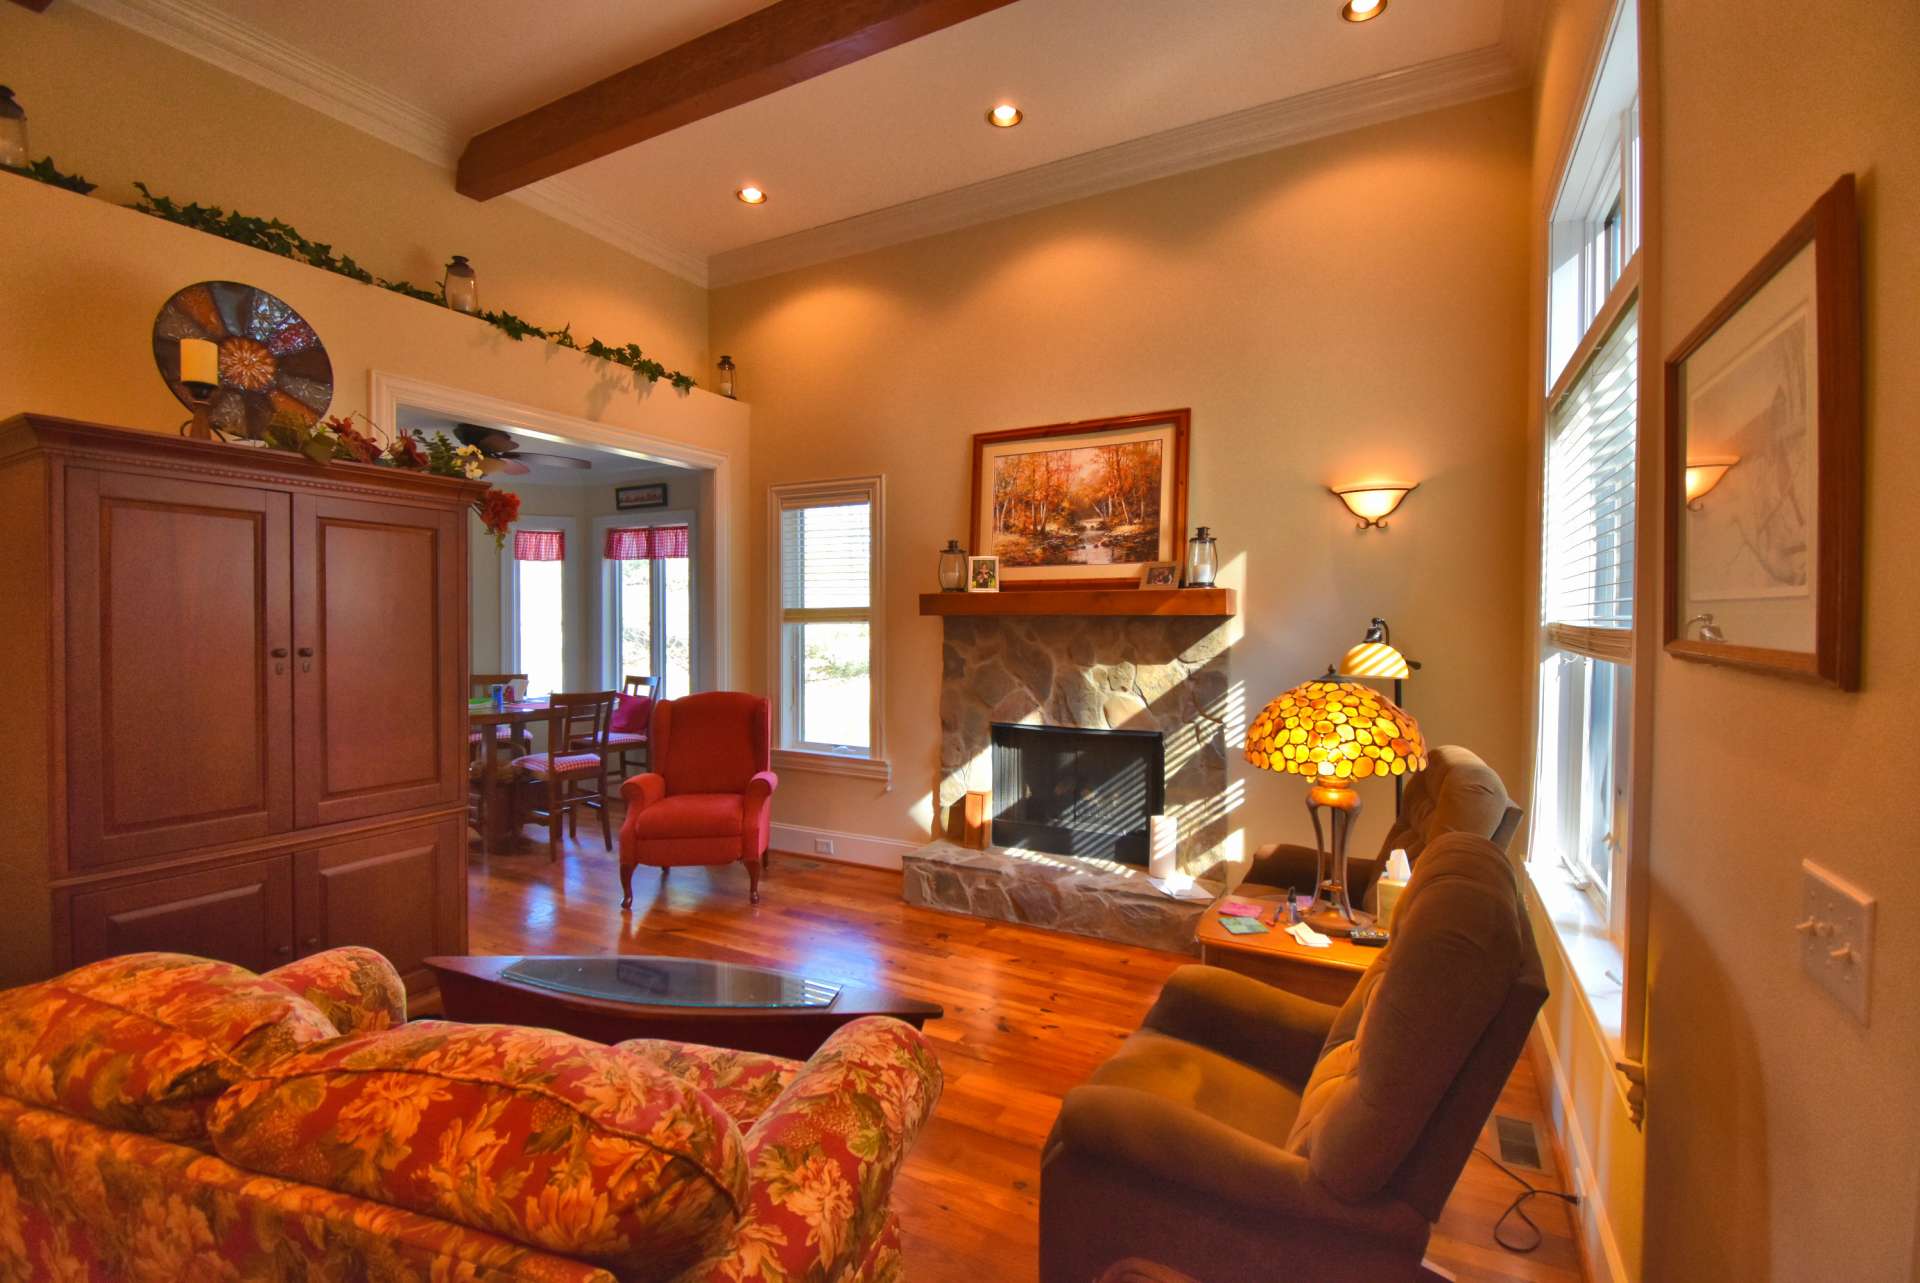 A stone fireplace with gas logs in the living area sets the pace for a quiet and peaceful evening. Notice the unique flooring reclaimed from an Ashe County tobacco barn. Another unique feature is the 12' ceiling and the "shelf" along the interior wall.